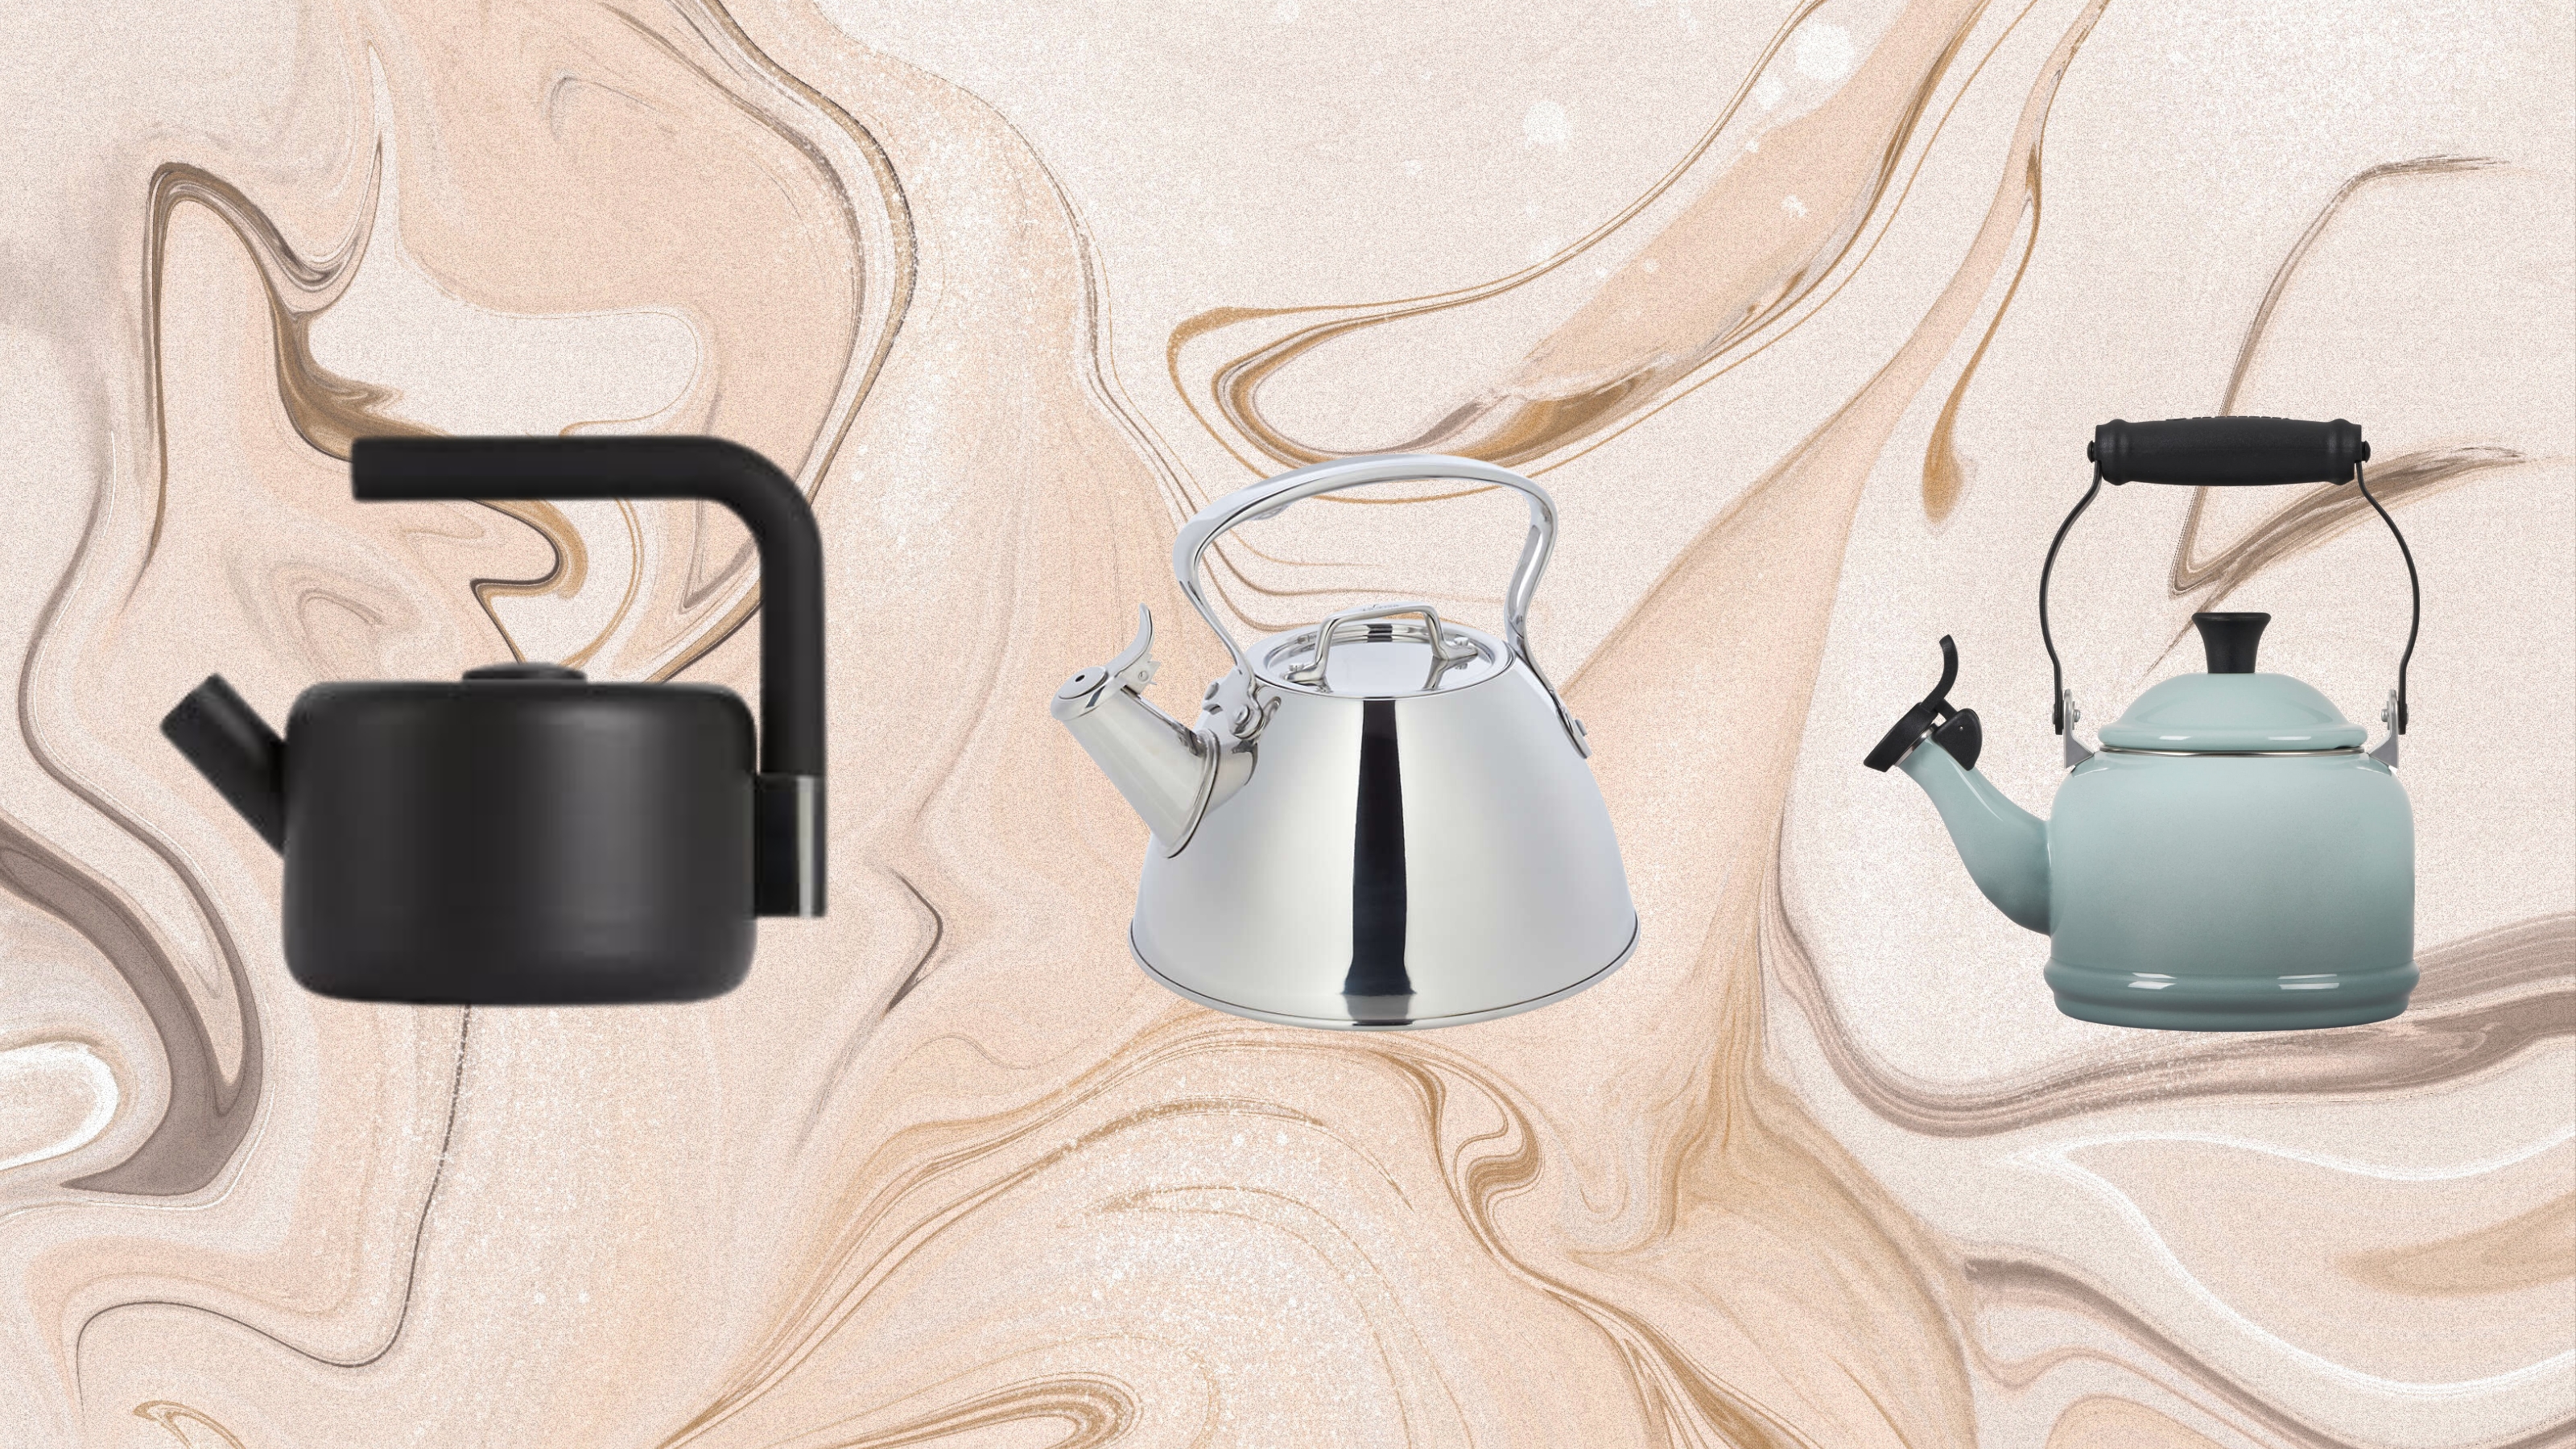 The 6 best stovetop kettles — reviewed and rated